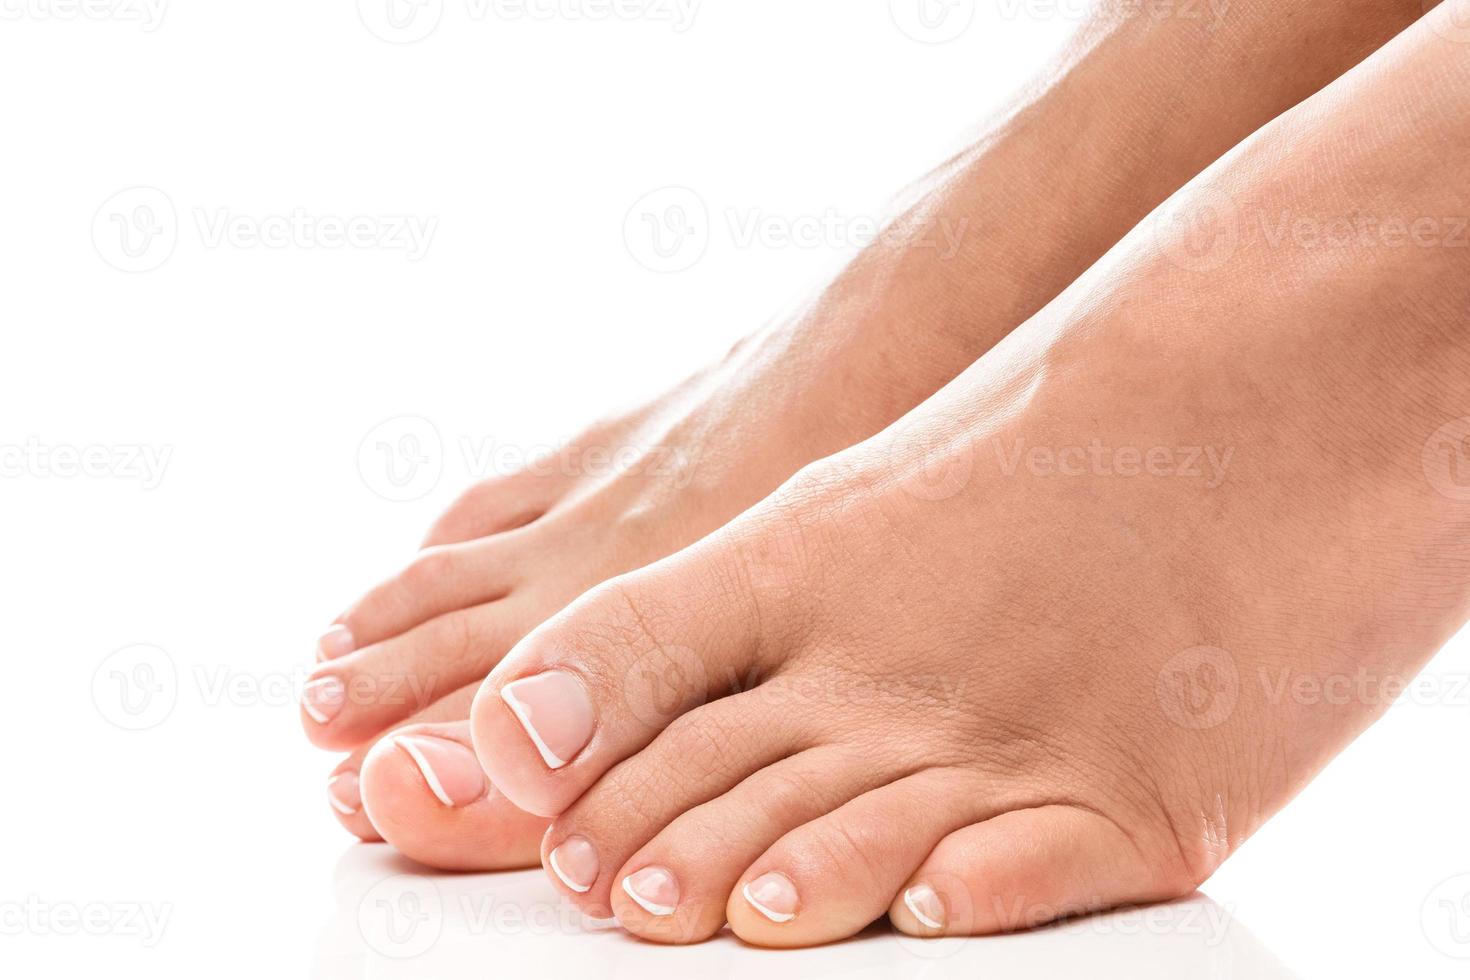 Female feet with soft skin and french pedicure on white background photo